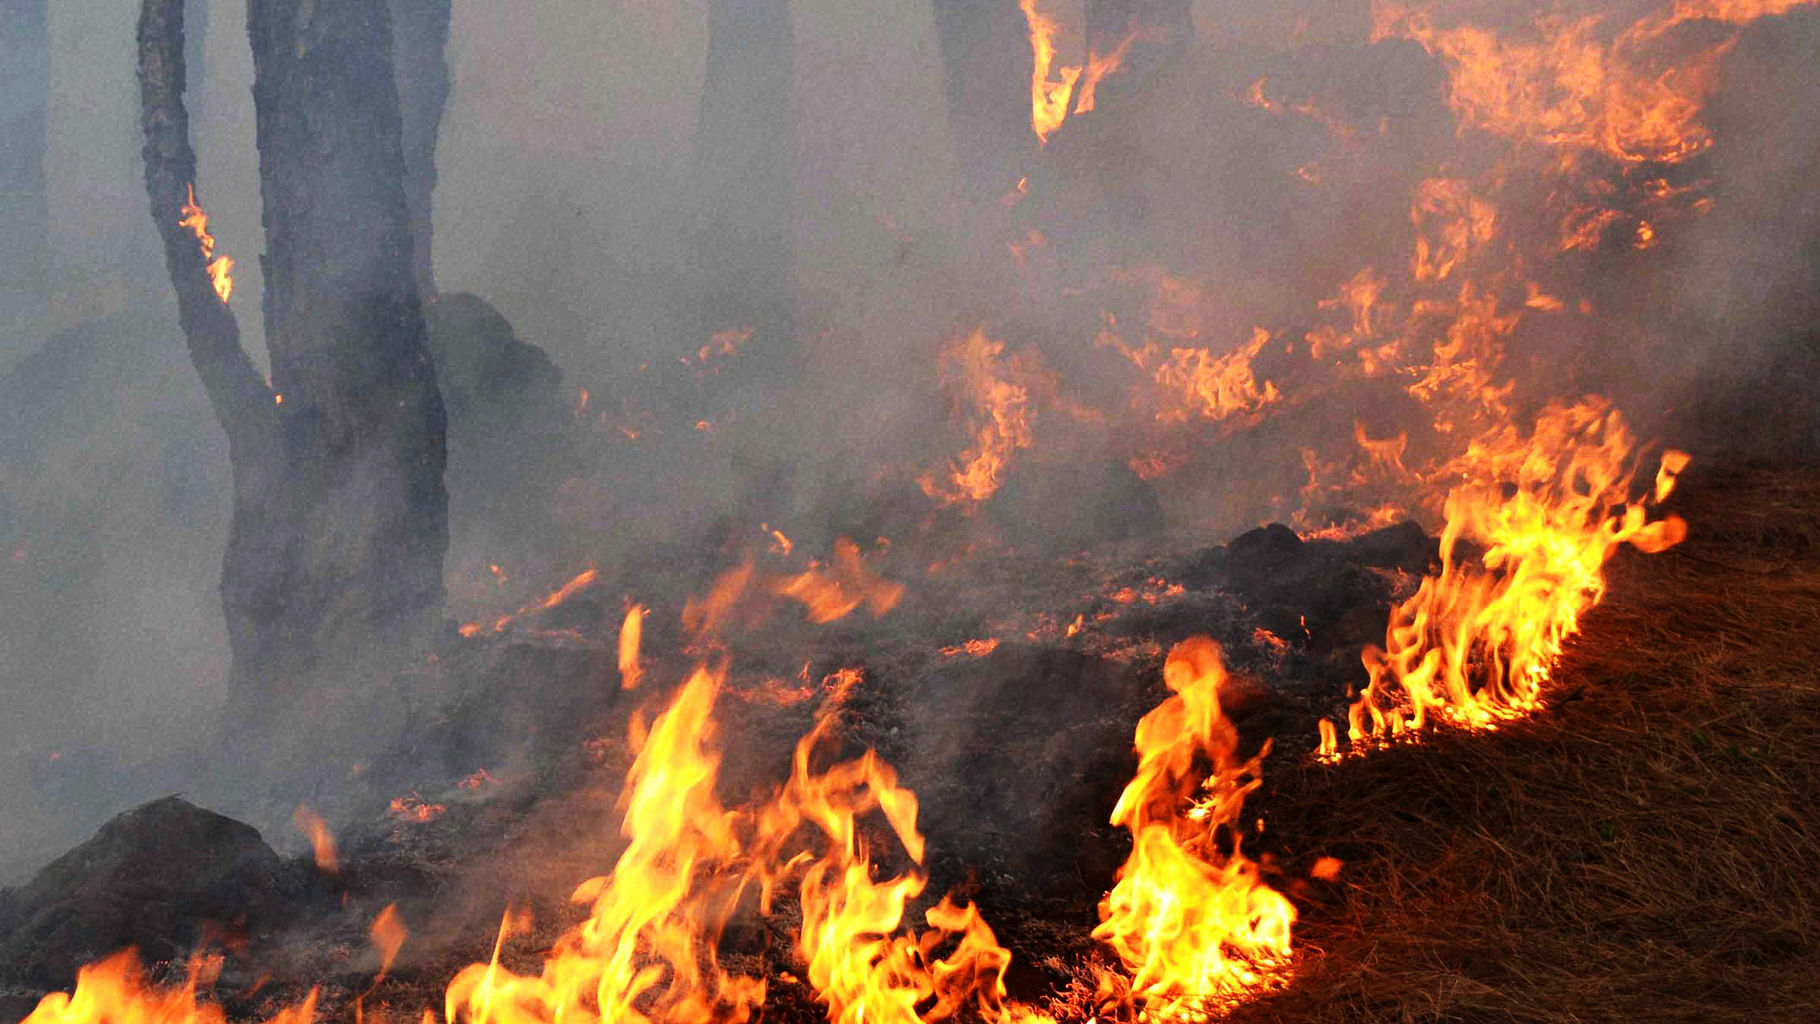 Forest fires have afflicted several parts of India in the last couple of months. Image used for representational purposes.